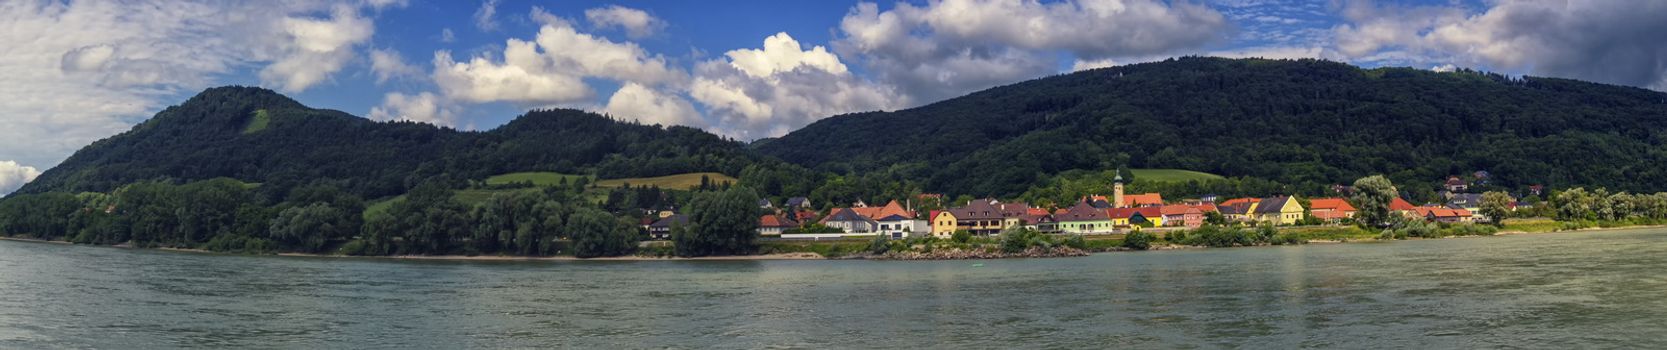 Panoramic view on the village of Willendorf on the river Danube in the Wachau region by day, Austria